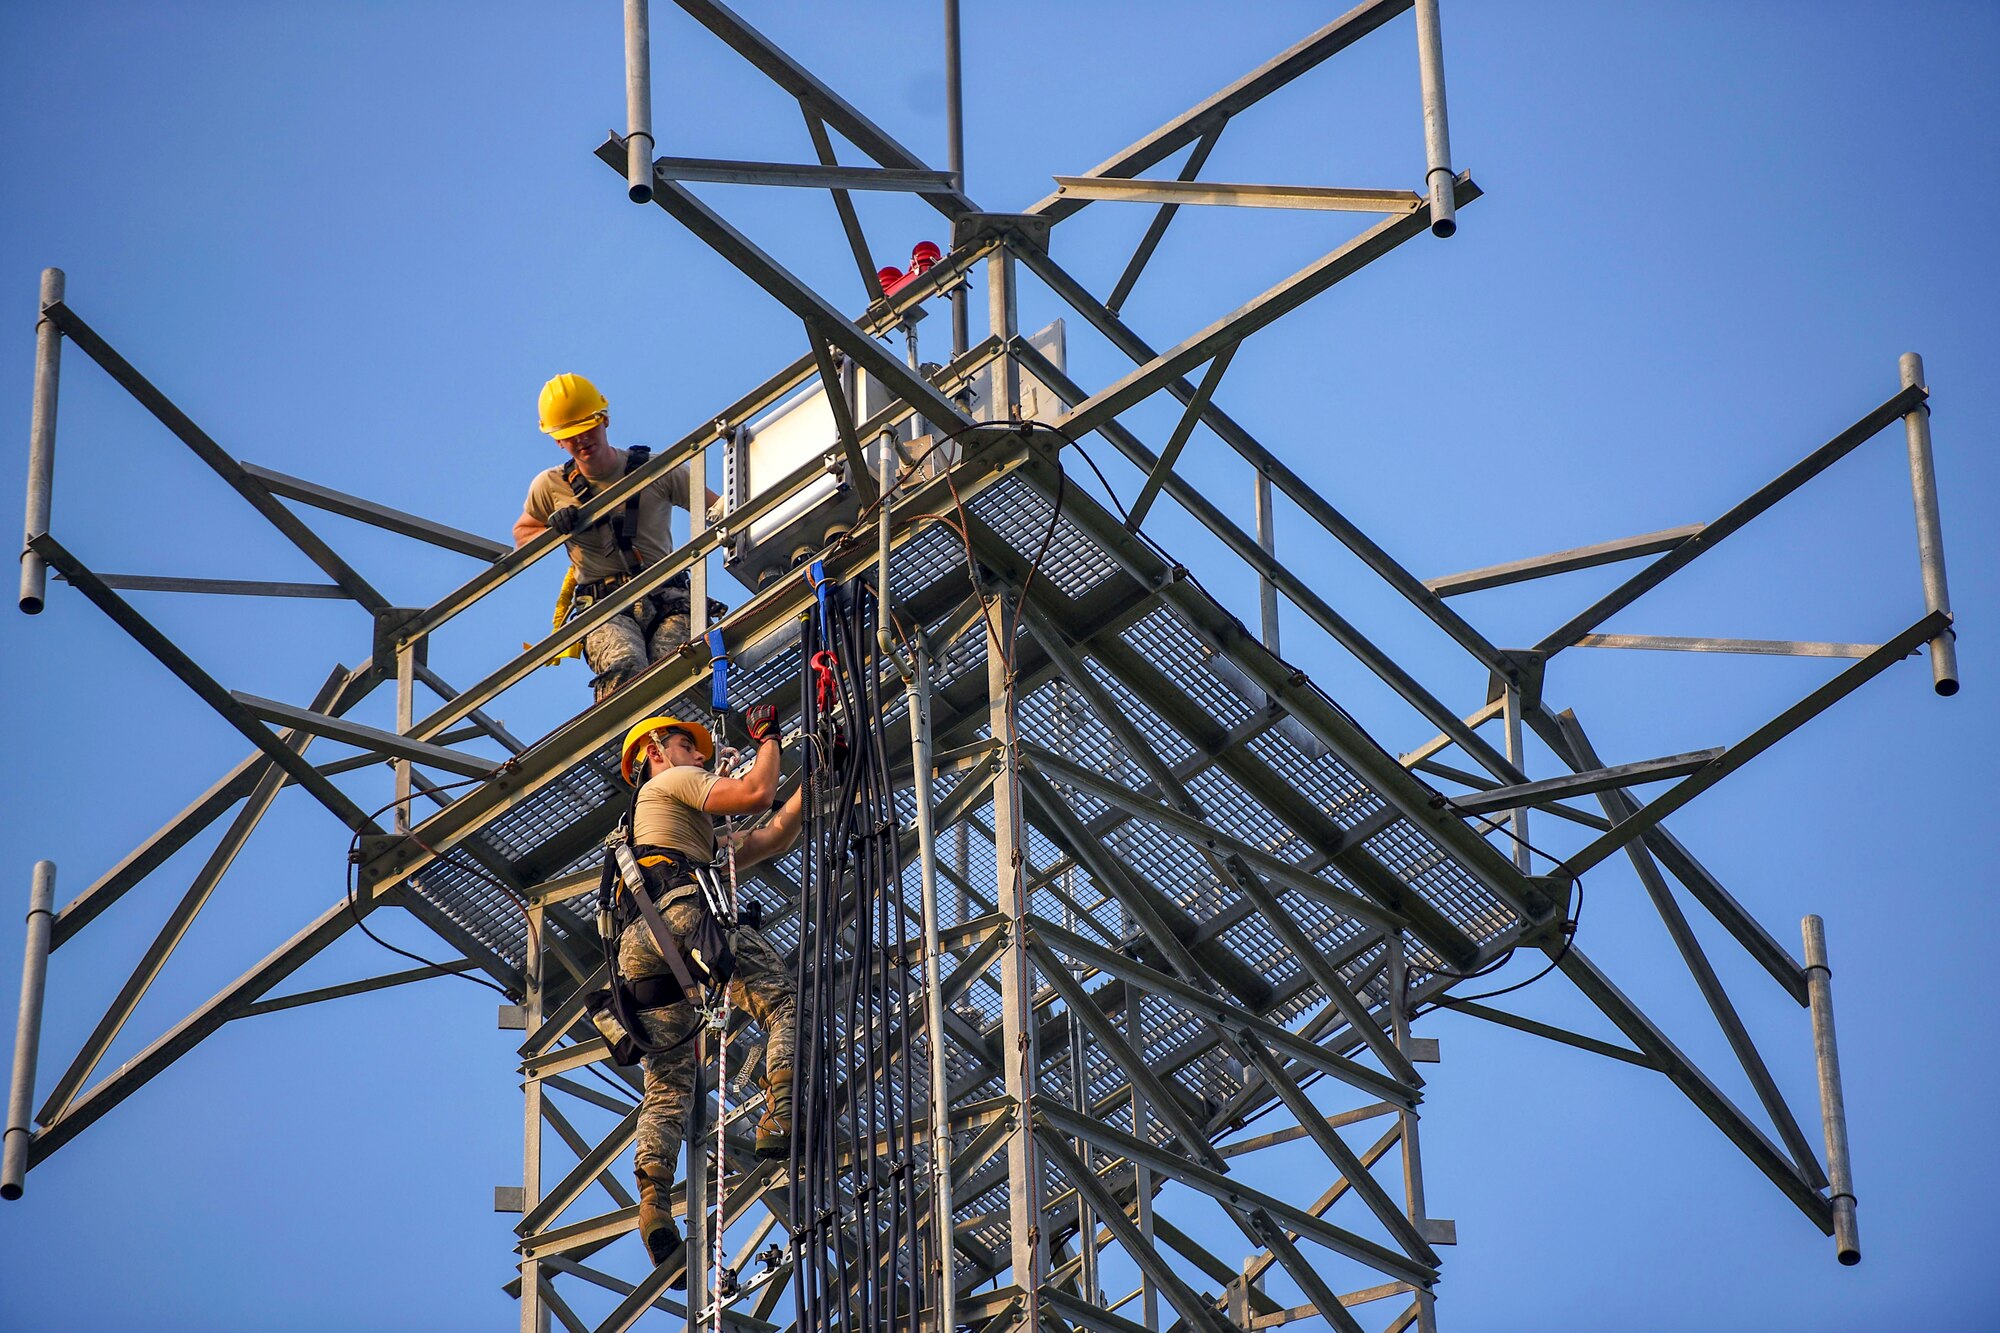 Airman Jacob Pugh and Airman 1st Class Brandon Culp, 14th Operations Support Squadron Radar, Airfield and Weather Systems journeymen, attach new wiring on a radio tower July 16, 2018, on Columbus Air Force Base, Miss. The RAWS unit supports base and regional radar equipment, ground-to-air radios and weather systems that support air traffic control, the National Weather Service, and command and control across the wing. (U.S. Air Force photo by Airman 1st Class Keith Holcomb)